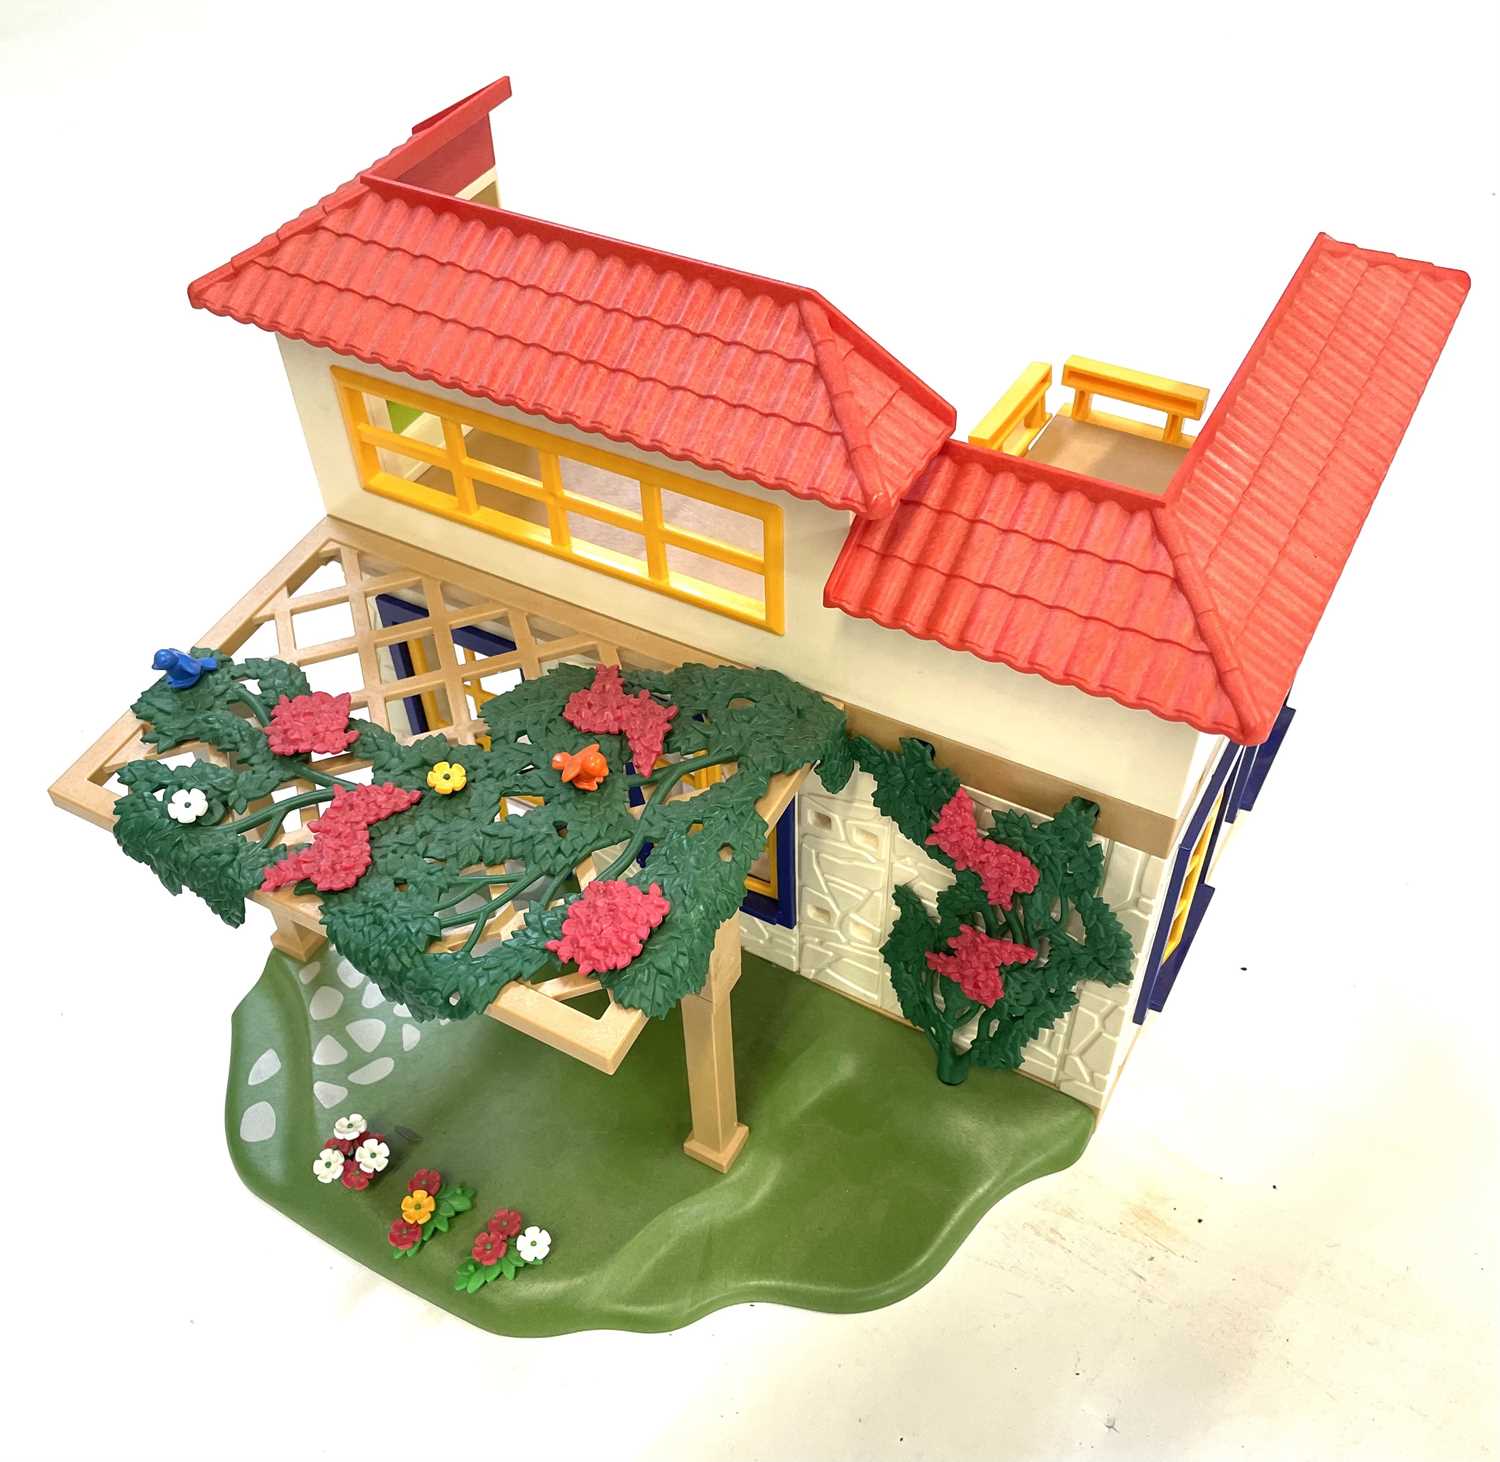 Playmobil 4857 Summer Fun Family Holiday Home, with box (flatpacked). Some small components may be